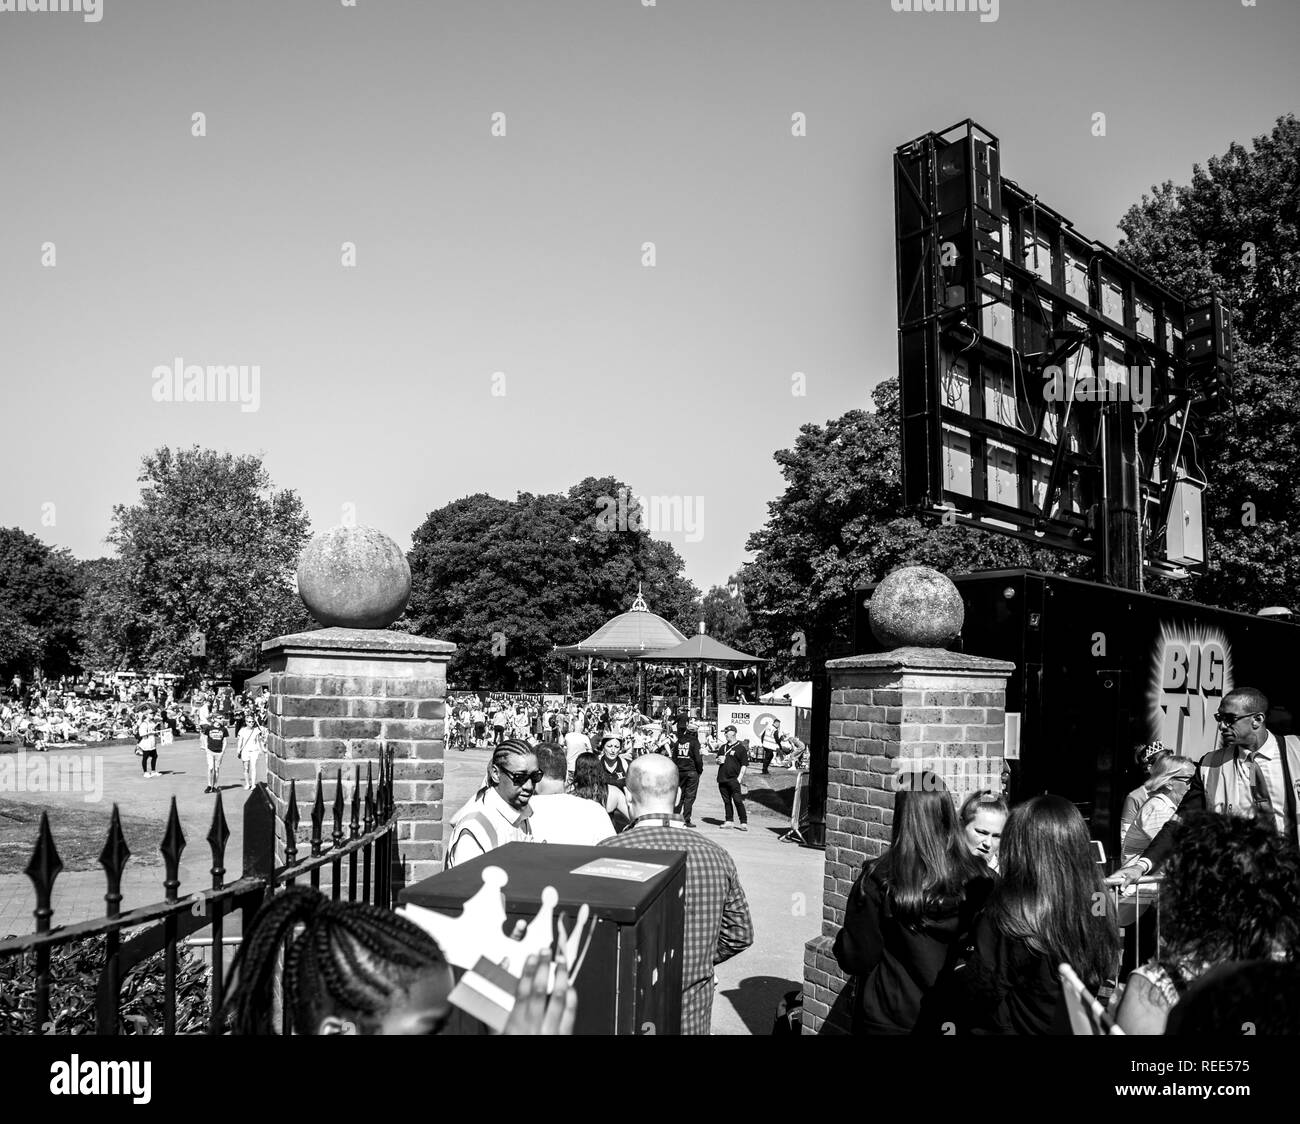 WINDSOR, BERKSHIRE, UNITED KINGDOM - MAY 19, 2018: Security cheks at the entrance to live streaming of royal wedding marriage celebration of Prince Harry and Meghan Markle - black and white  Stock Photo